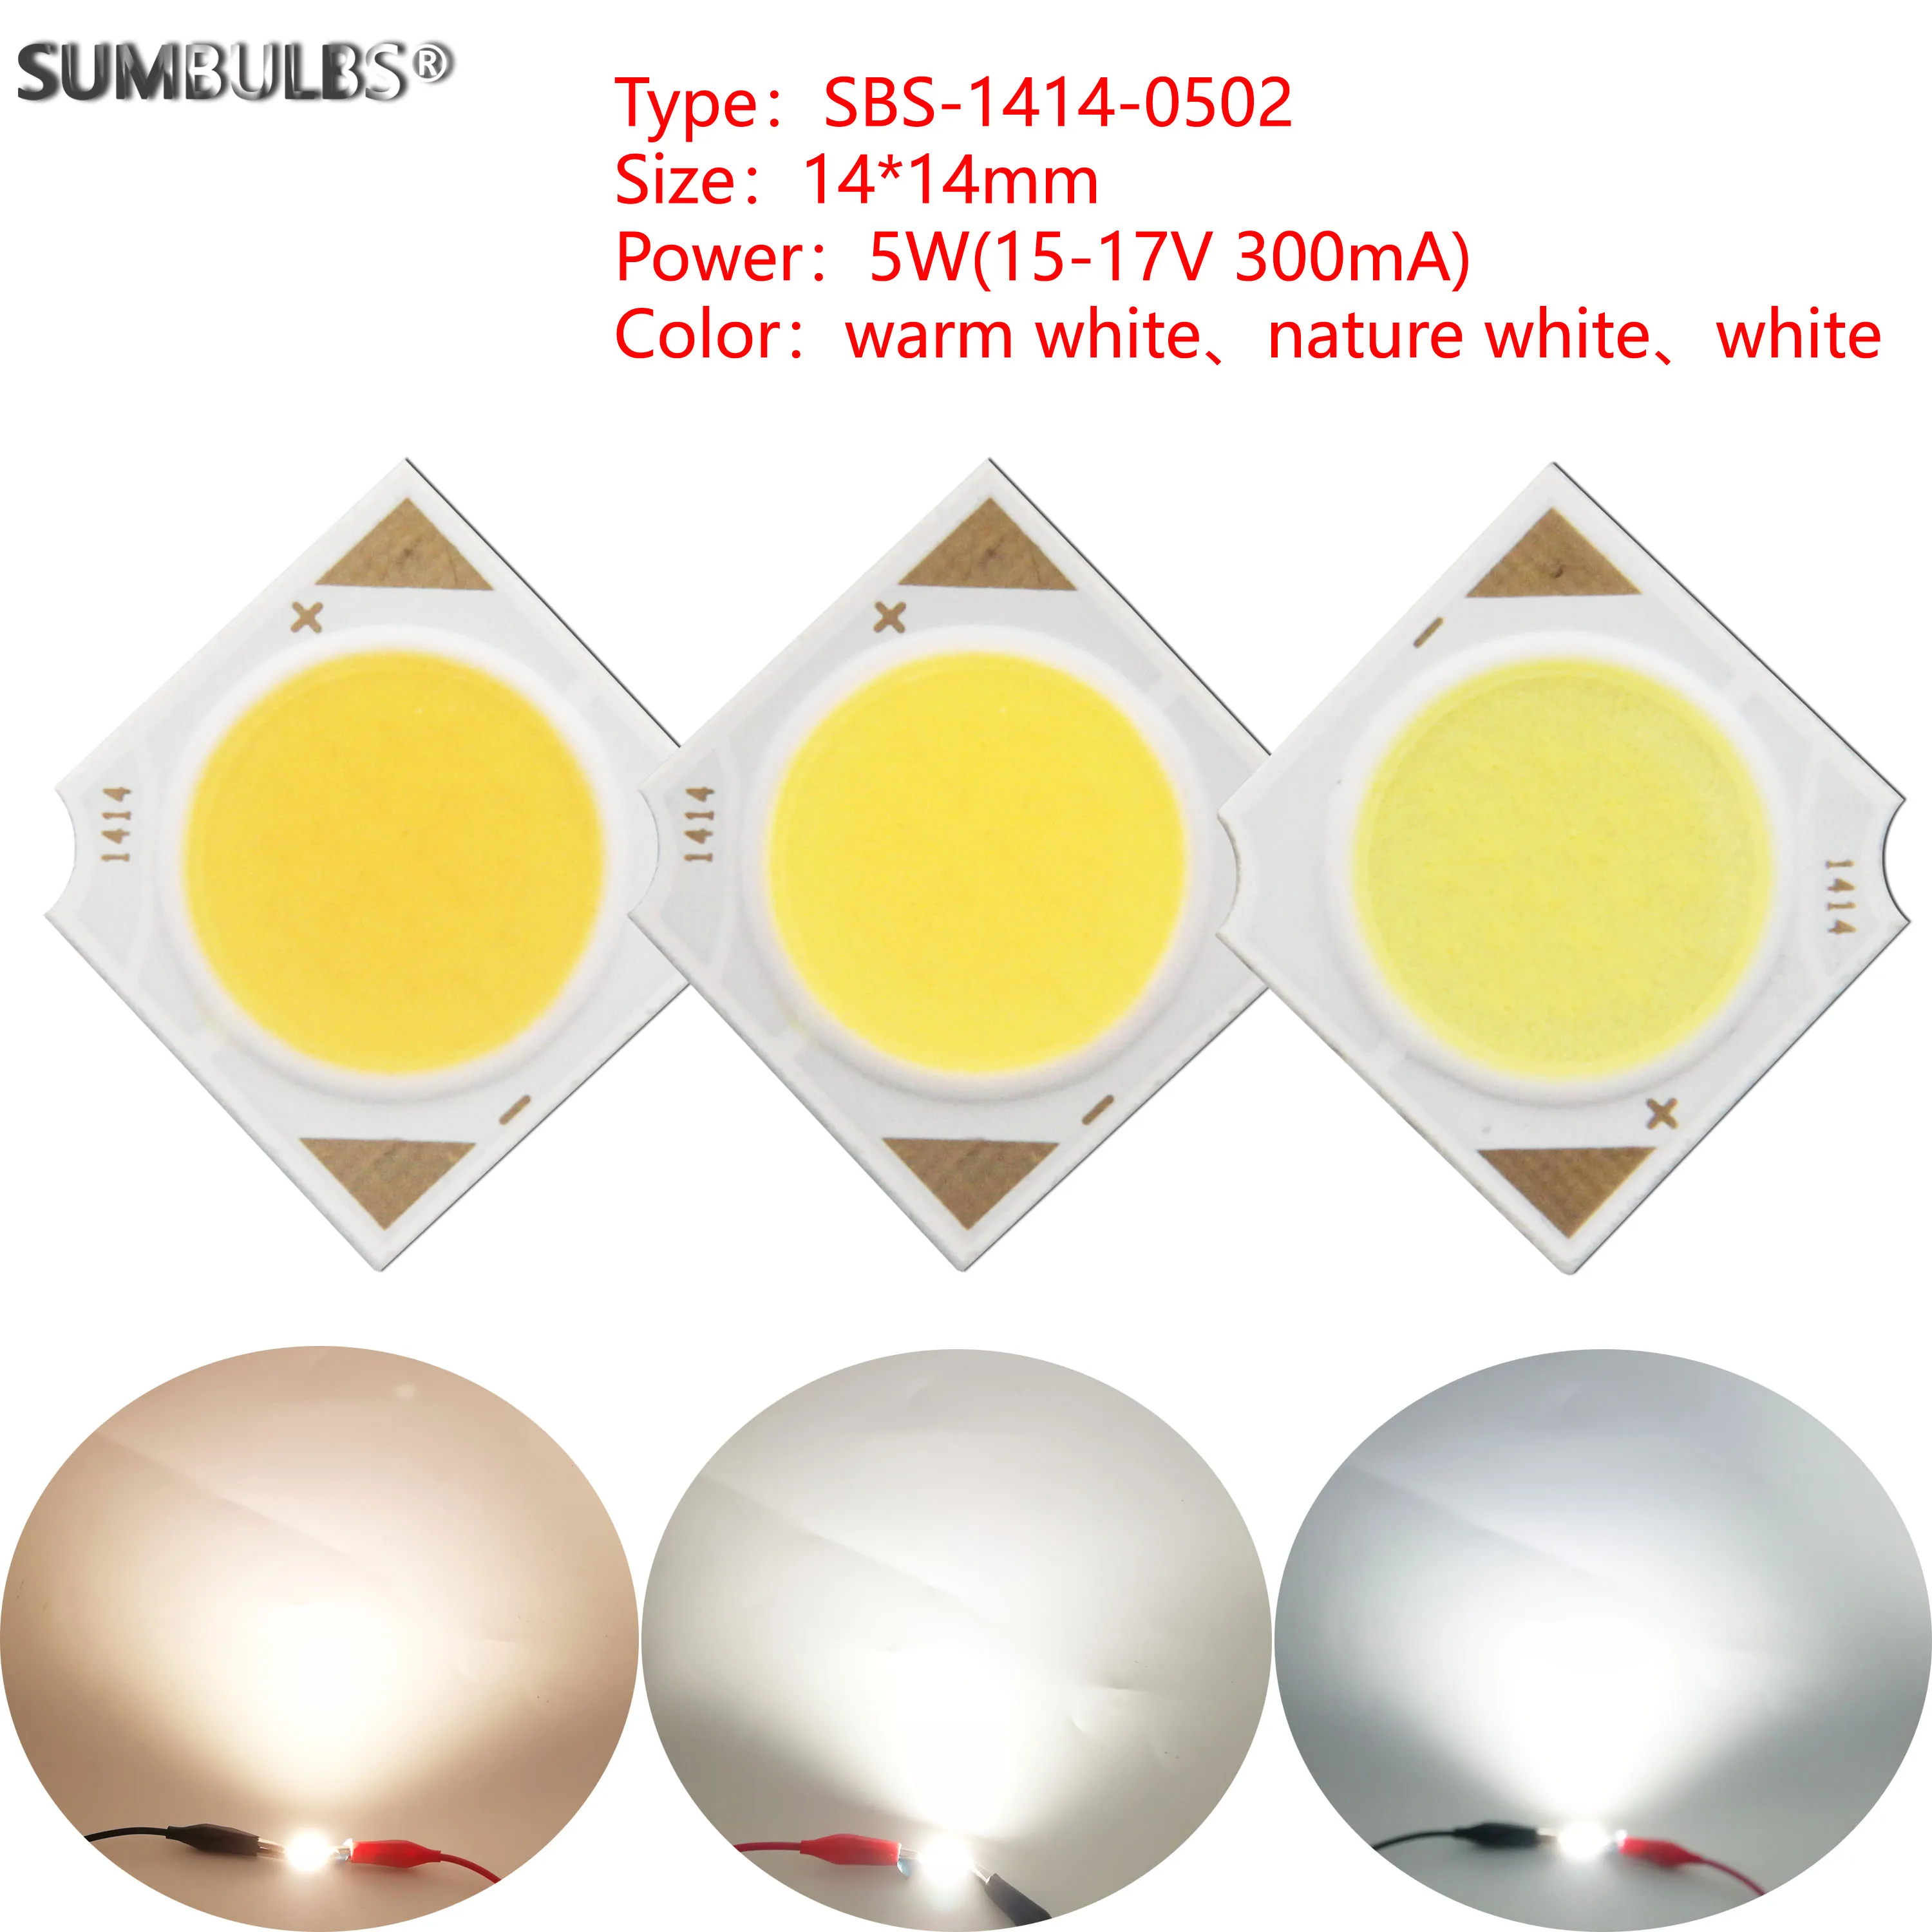 

[SUMBULBS] 5W LED COB Light Source 15V 300mA Epistar COB Chips Cold Warm Nature White for Down Spotlight Indoor Lamp